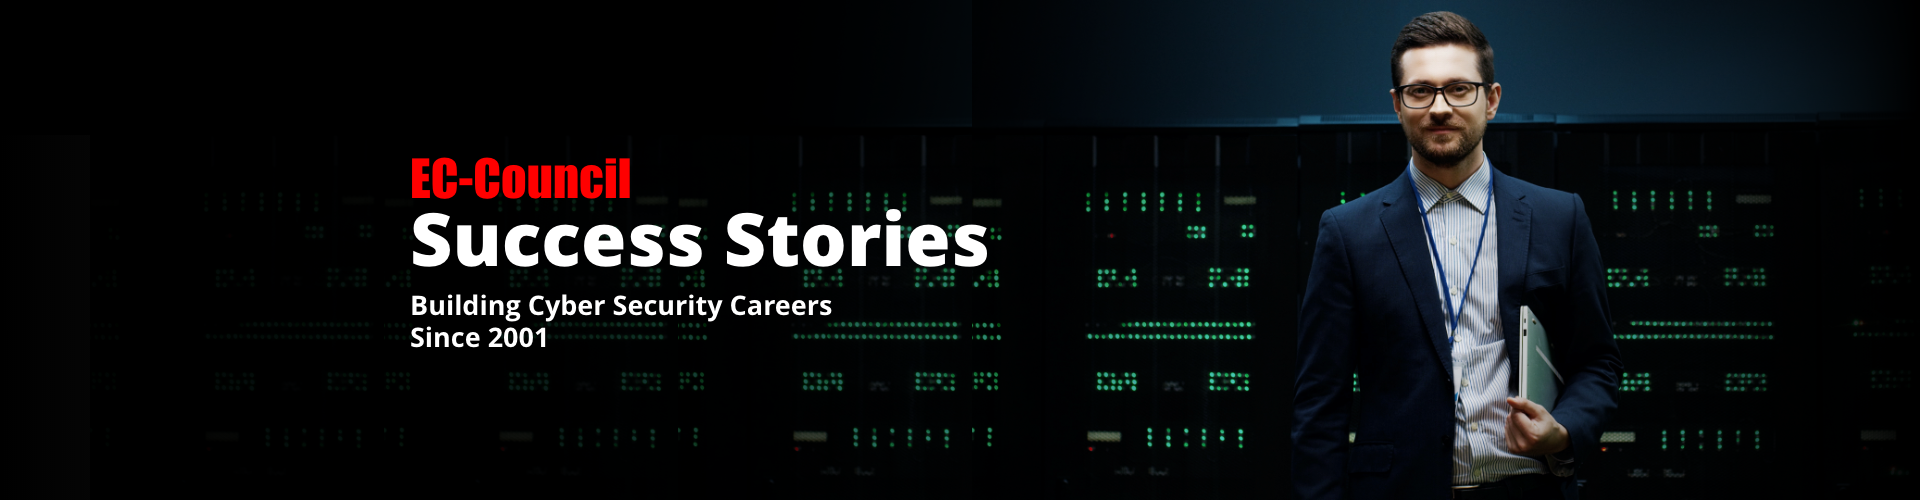 How C|EH Transformed Careers: Success Stories of Cyber Security Professionals